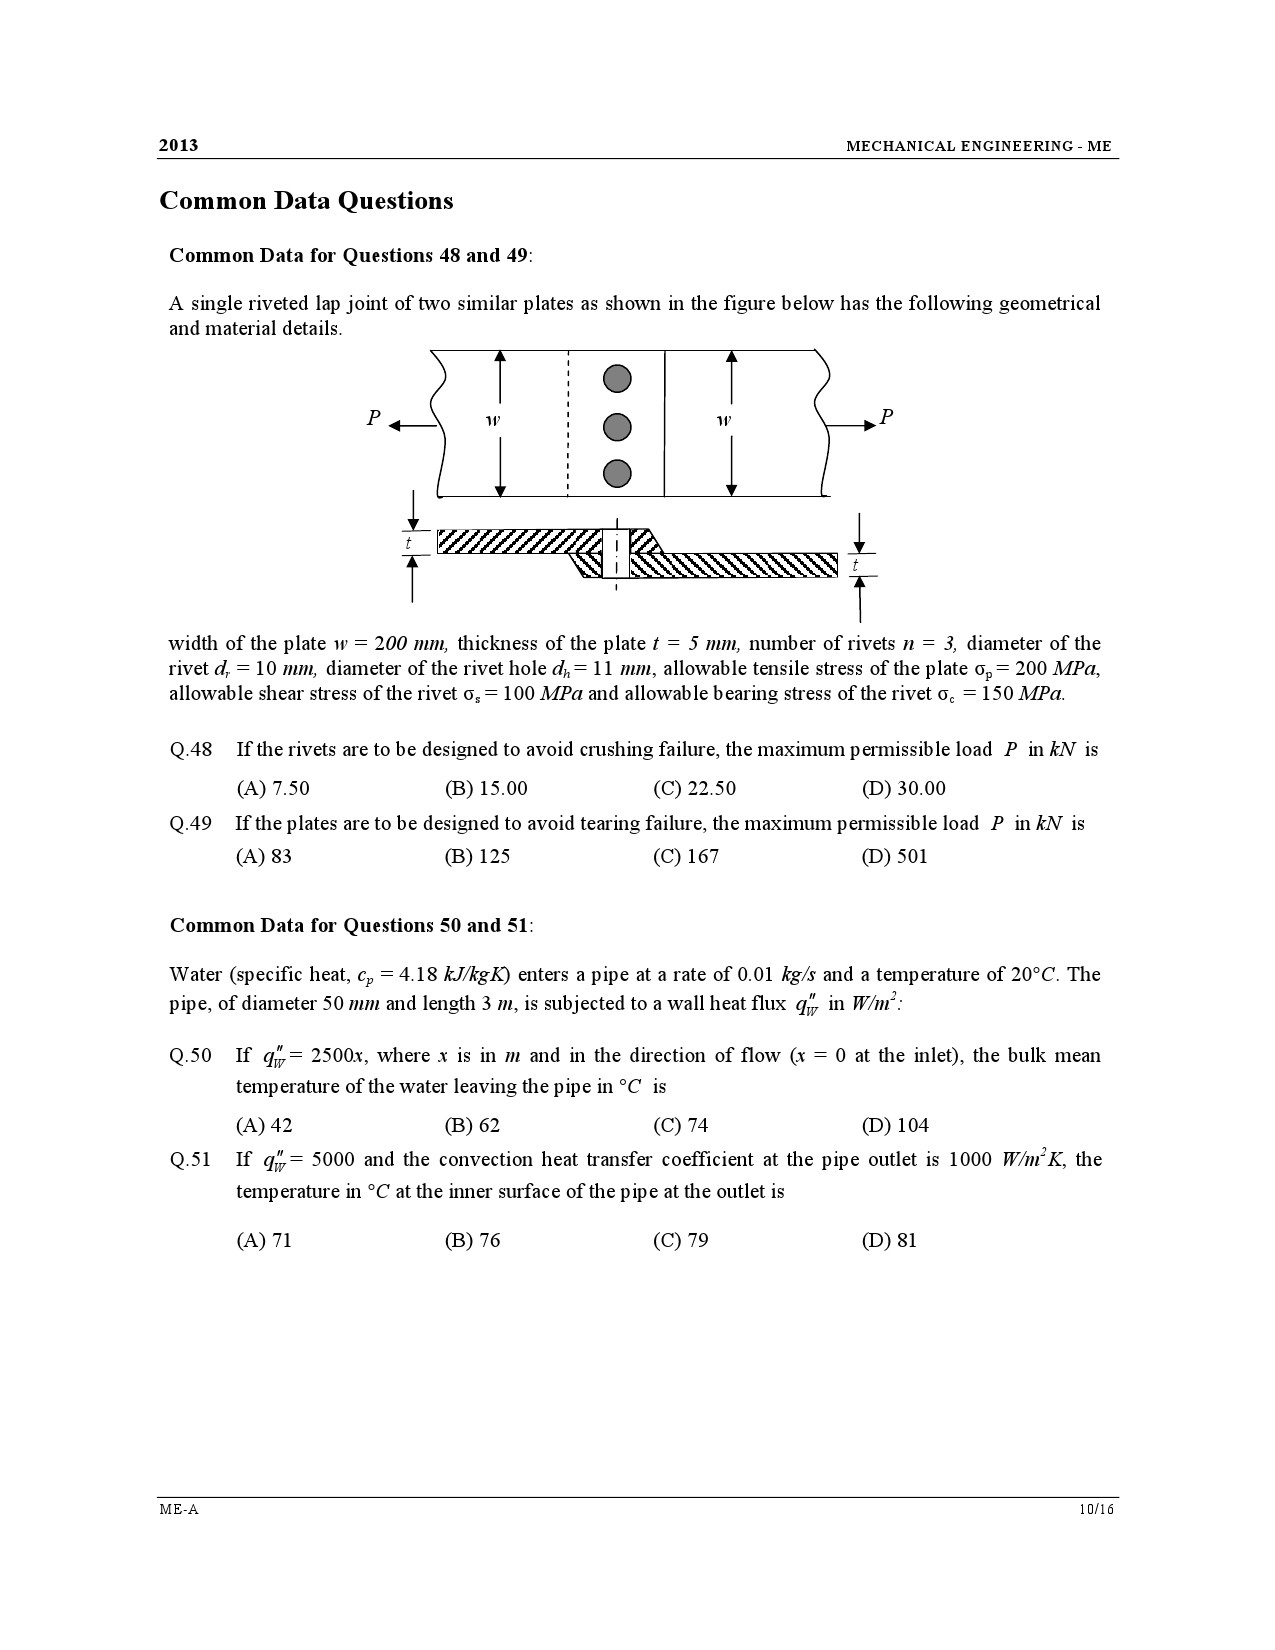 GATE Exam Question Paper 2013 Mechanical Engineering 10